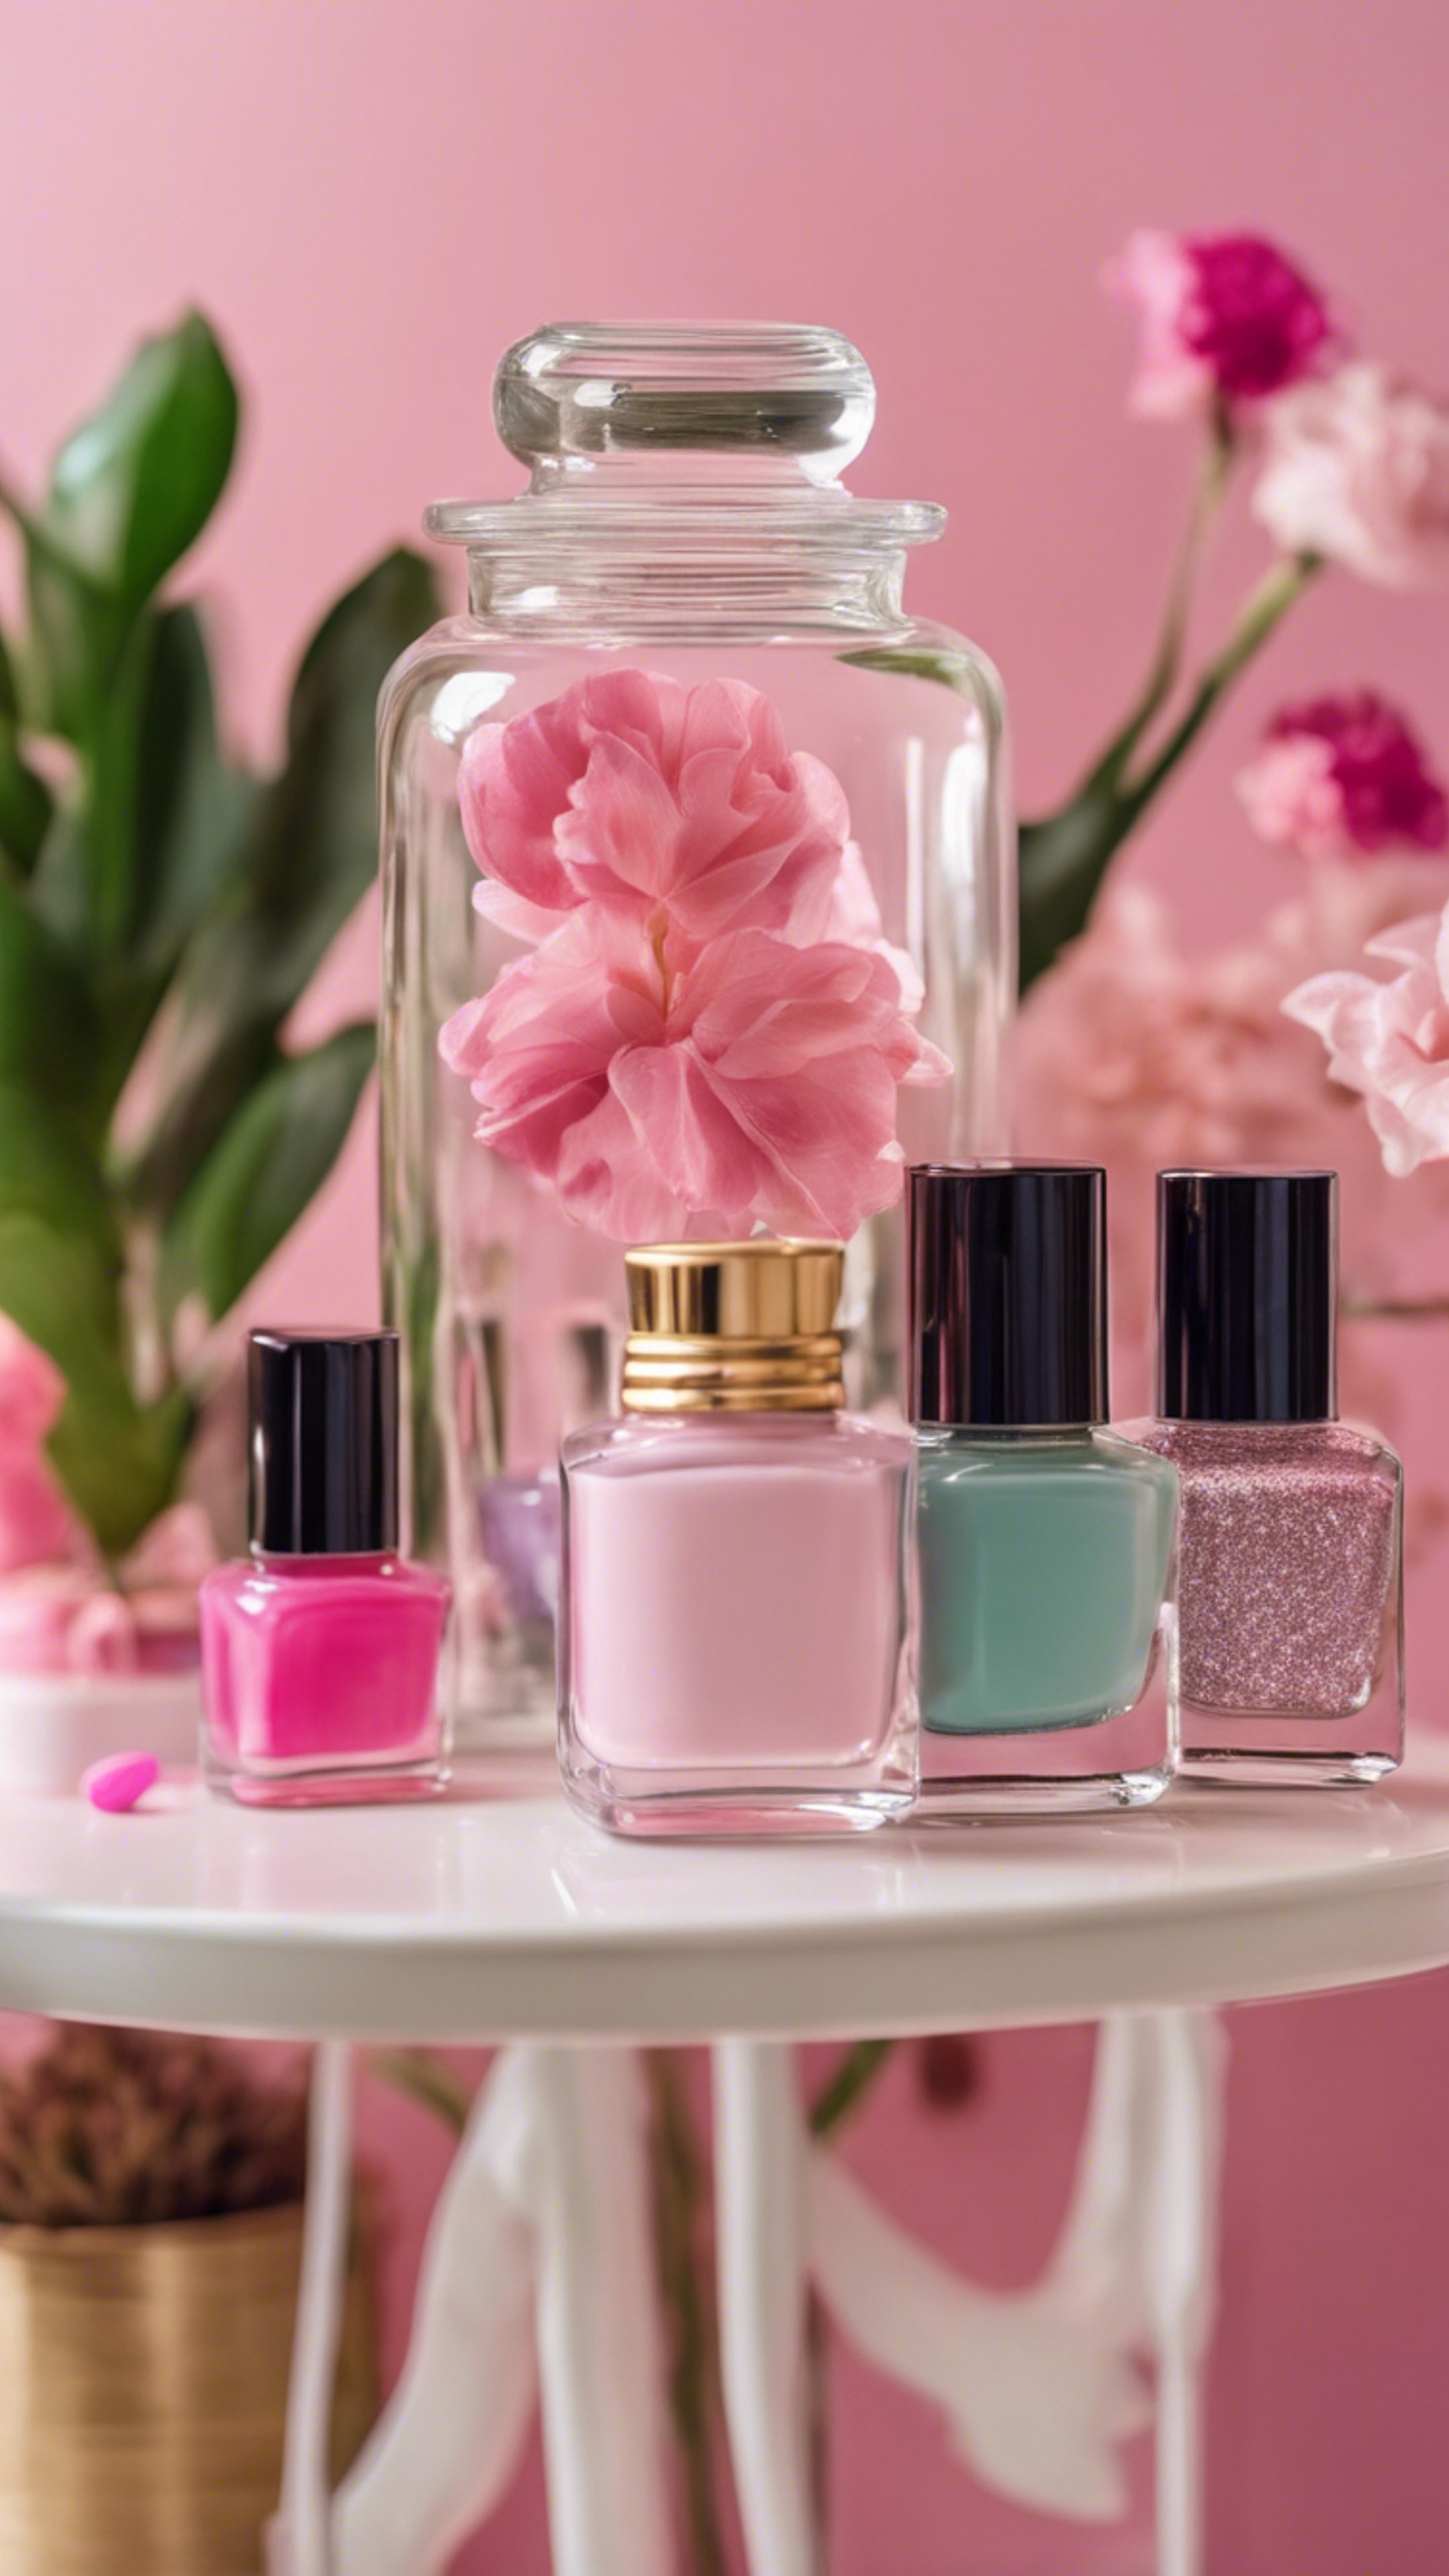 A glass jar full of colorful girly nail polishes on a pink dressing table with a chic plant in the background. Wallpaper[6e6d72fe0d8e4450902a]